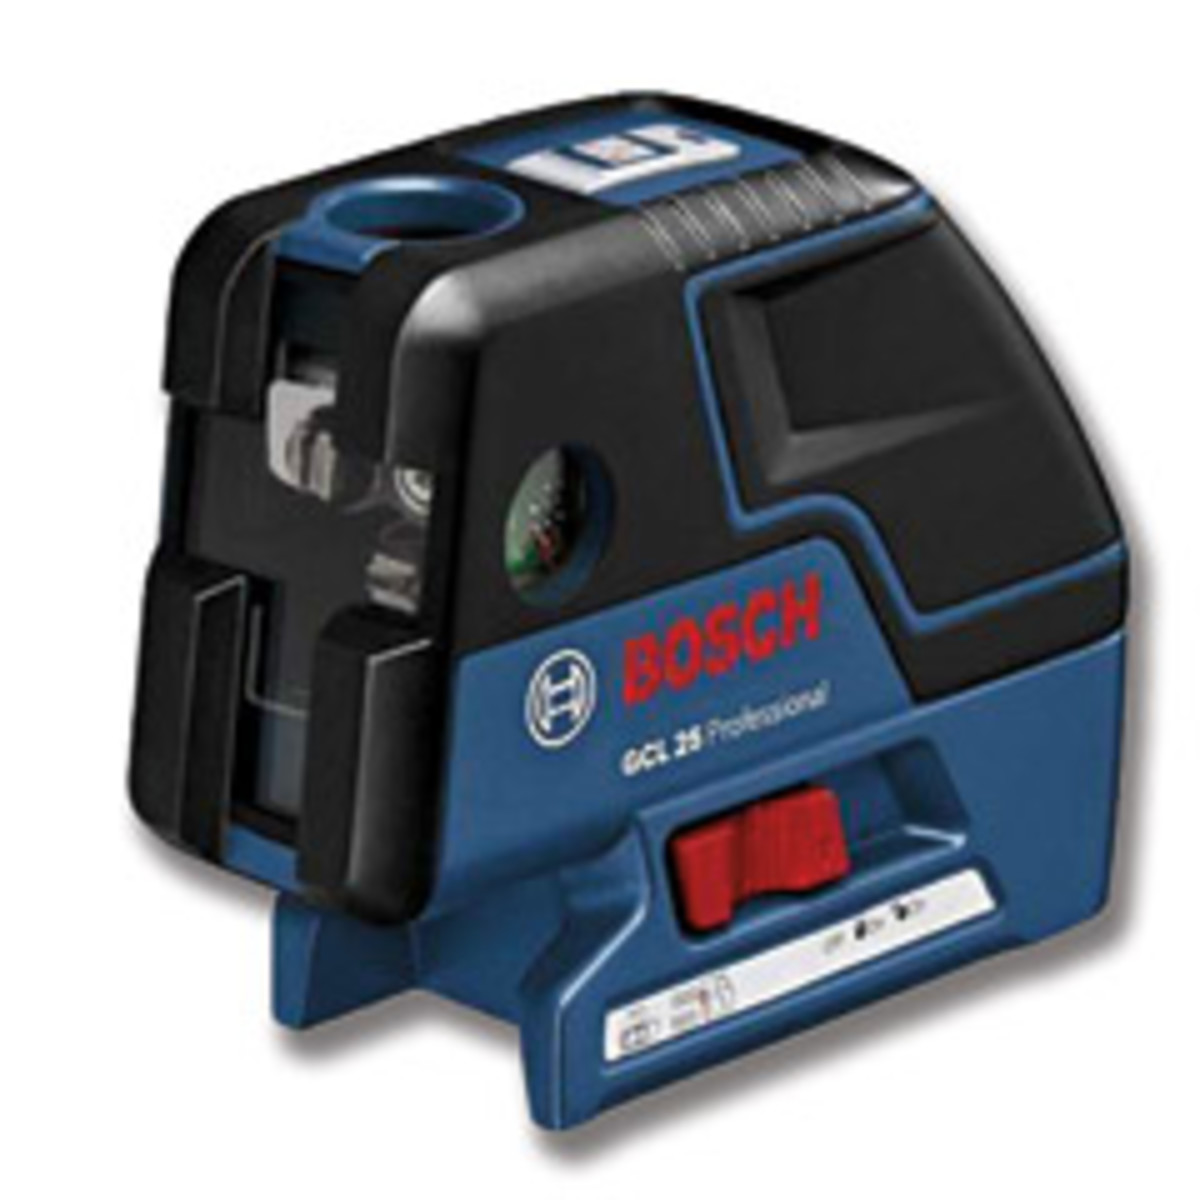 The Bosch GCL 25 five-point laser.